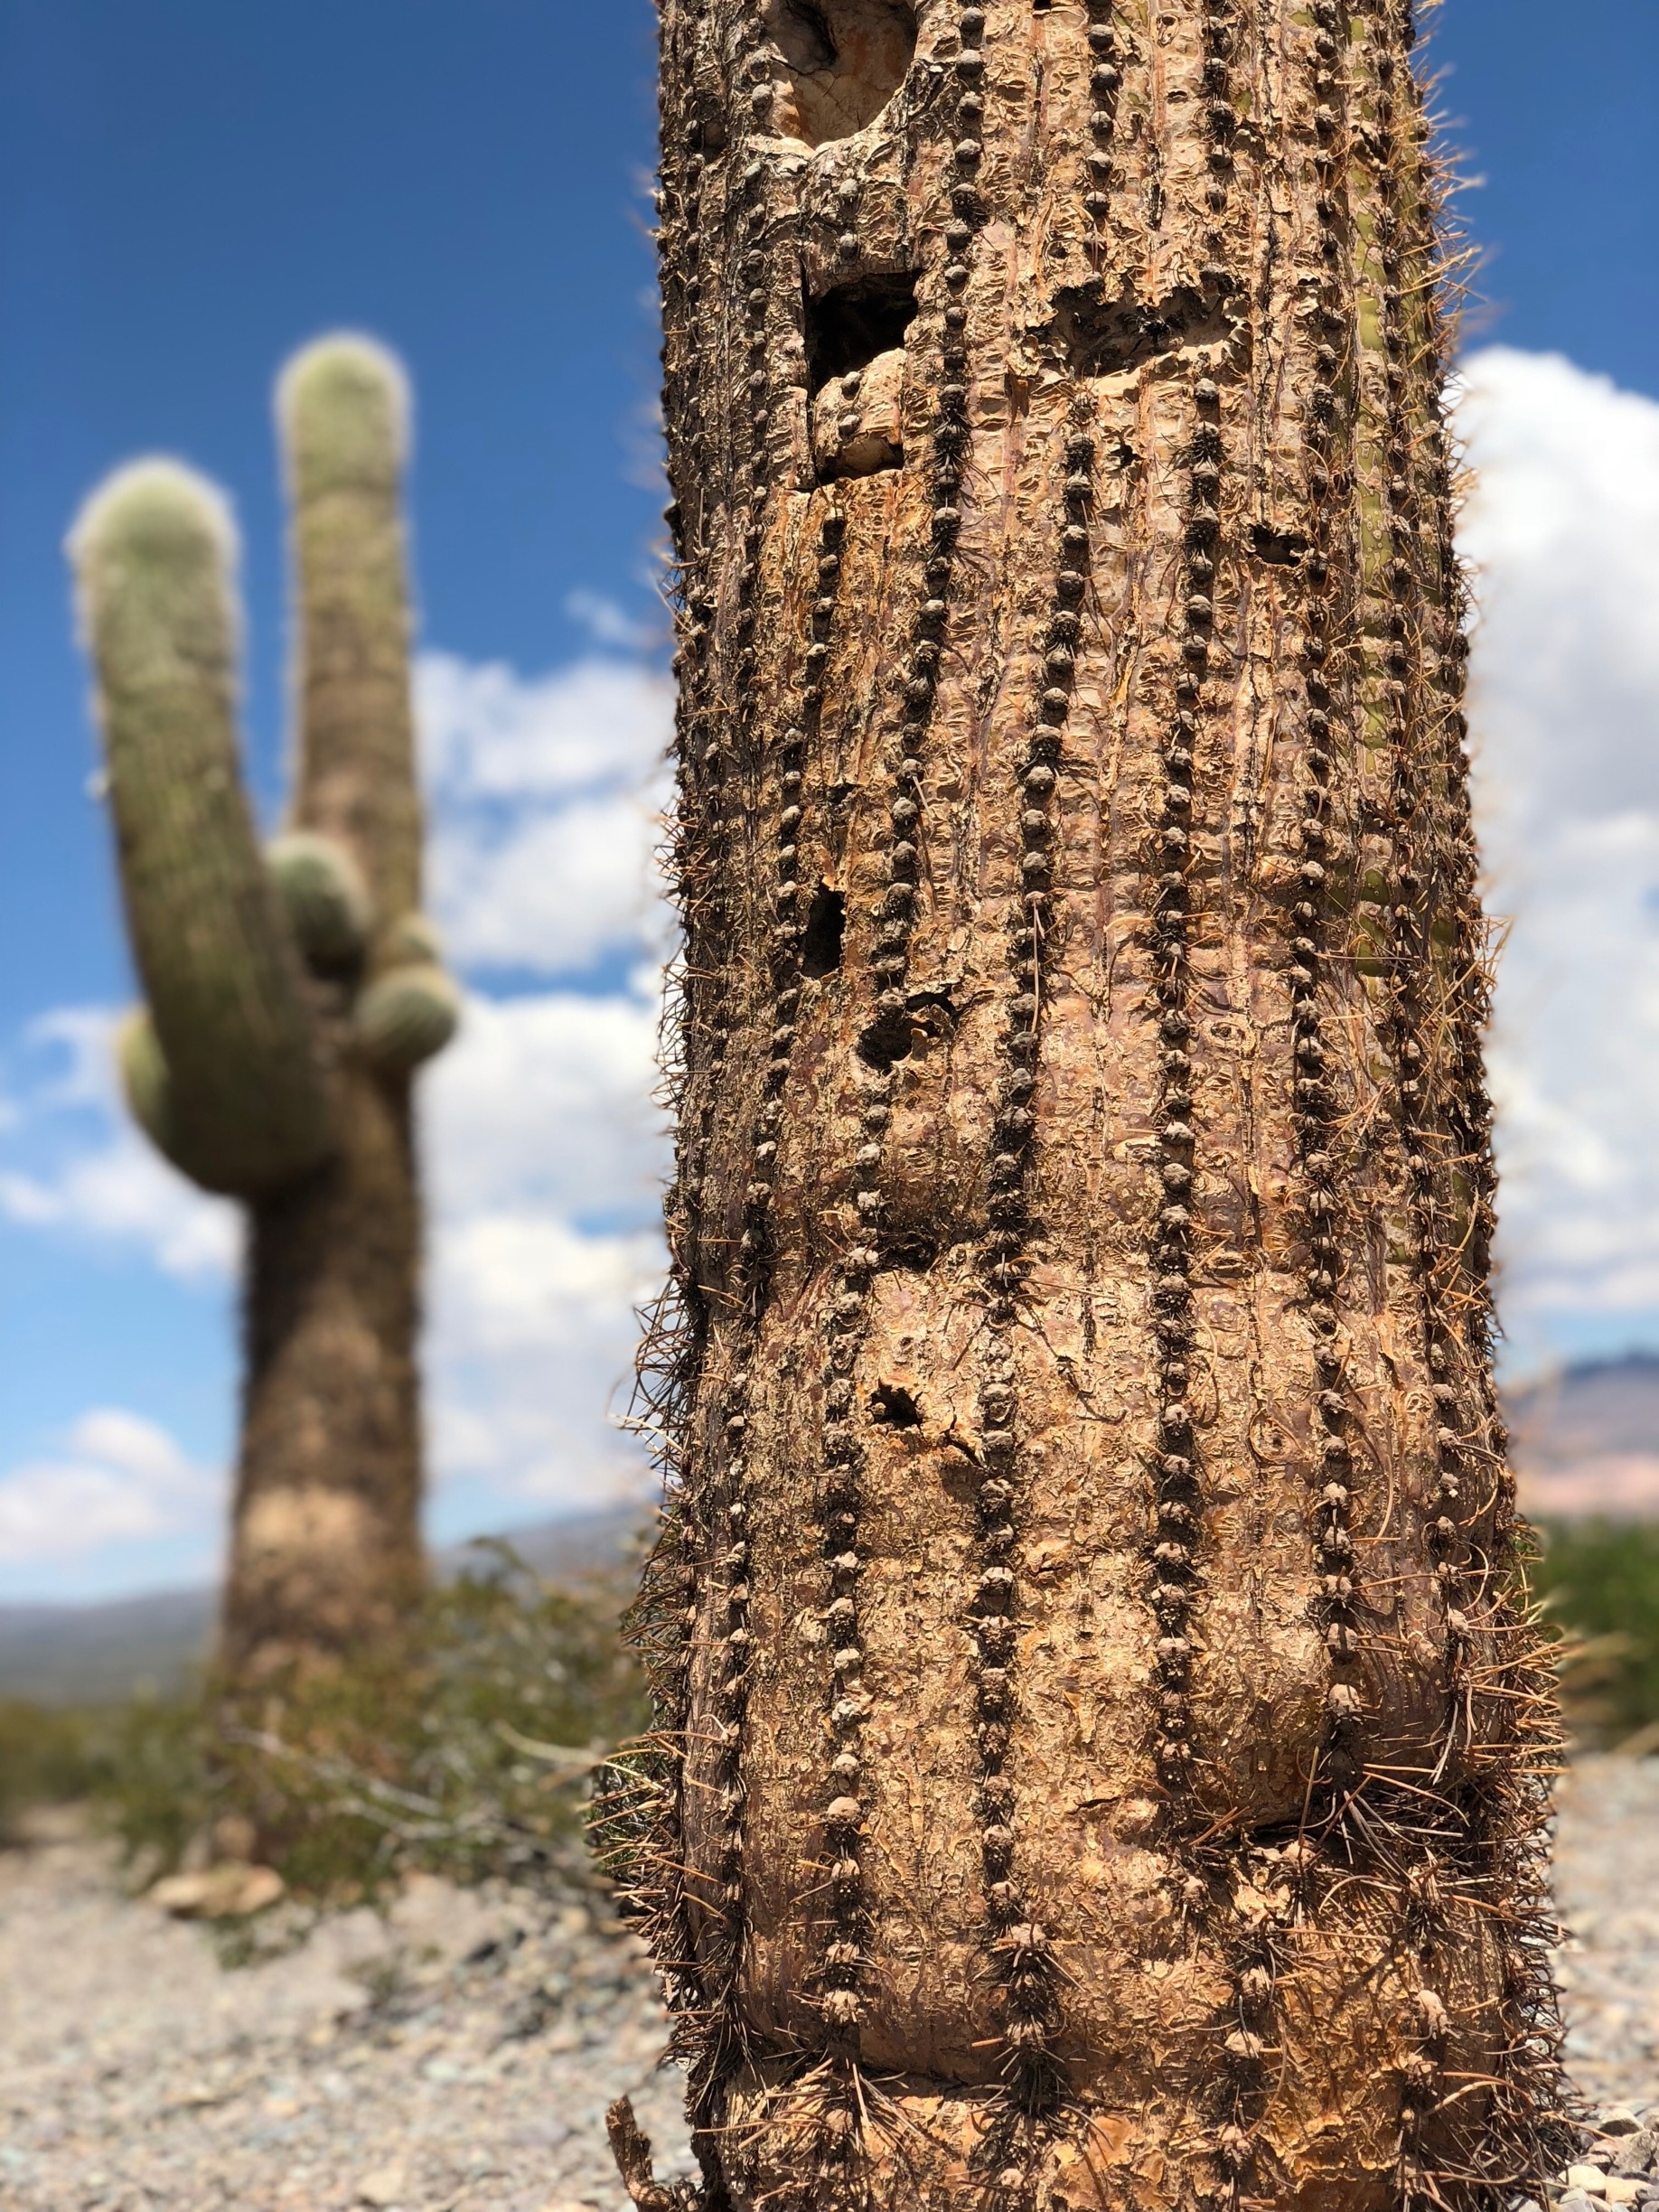 Huge cactuses can be found here